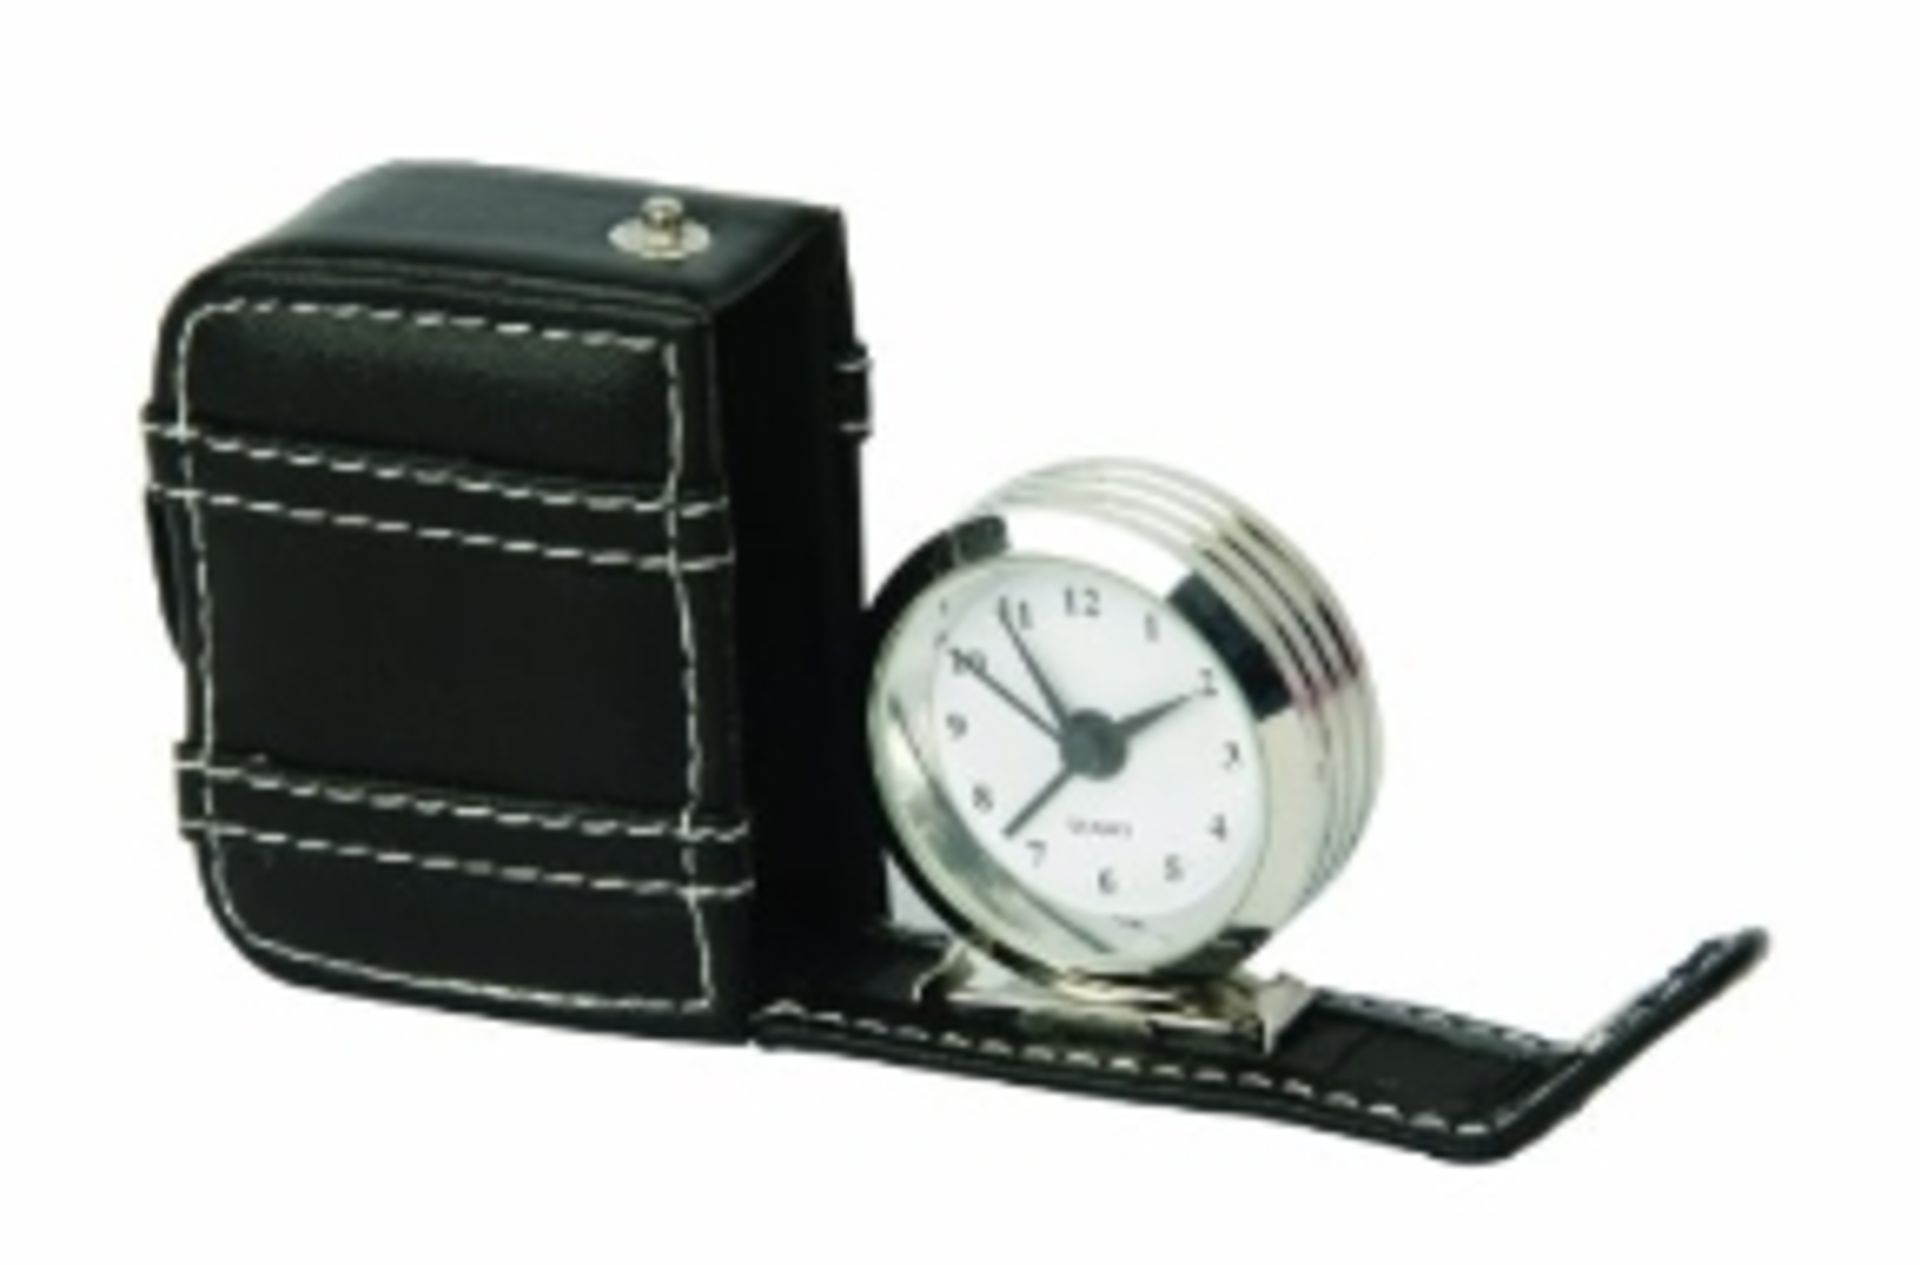 V *TRADE QTY* Brand New Time Goes By Travel Clock £7-49 (Ebay) X 5 YOUR BID PRICE TO BE MULTIPLIED